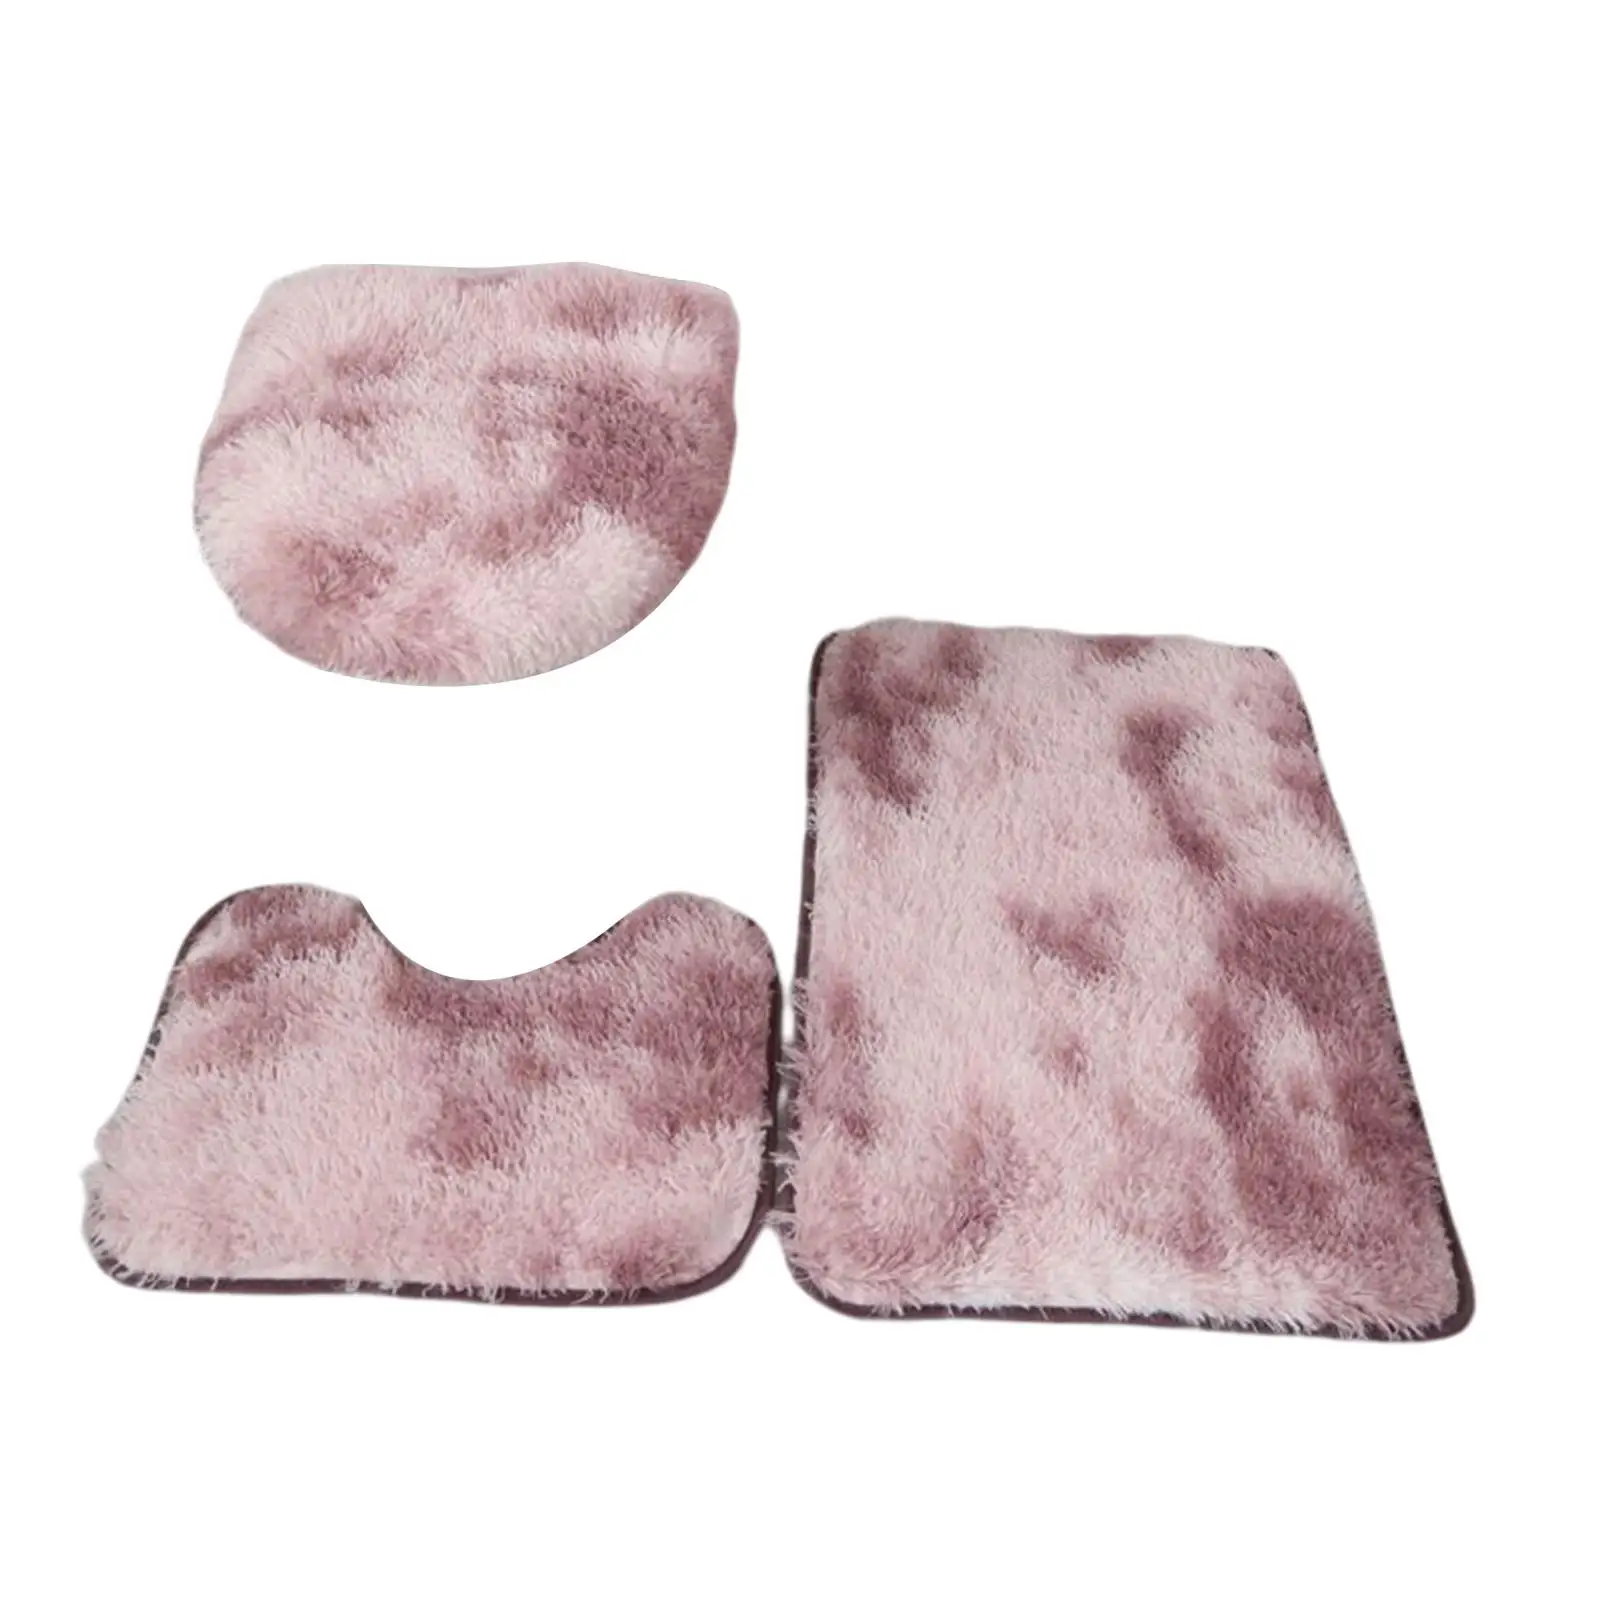 3Pcs bath Mats Set with Toilet Lid Cover Absorbent for Bathtubs Tub